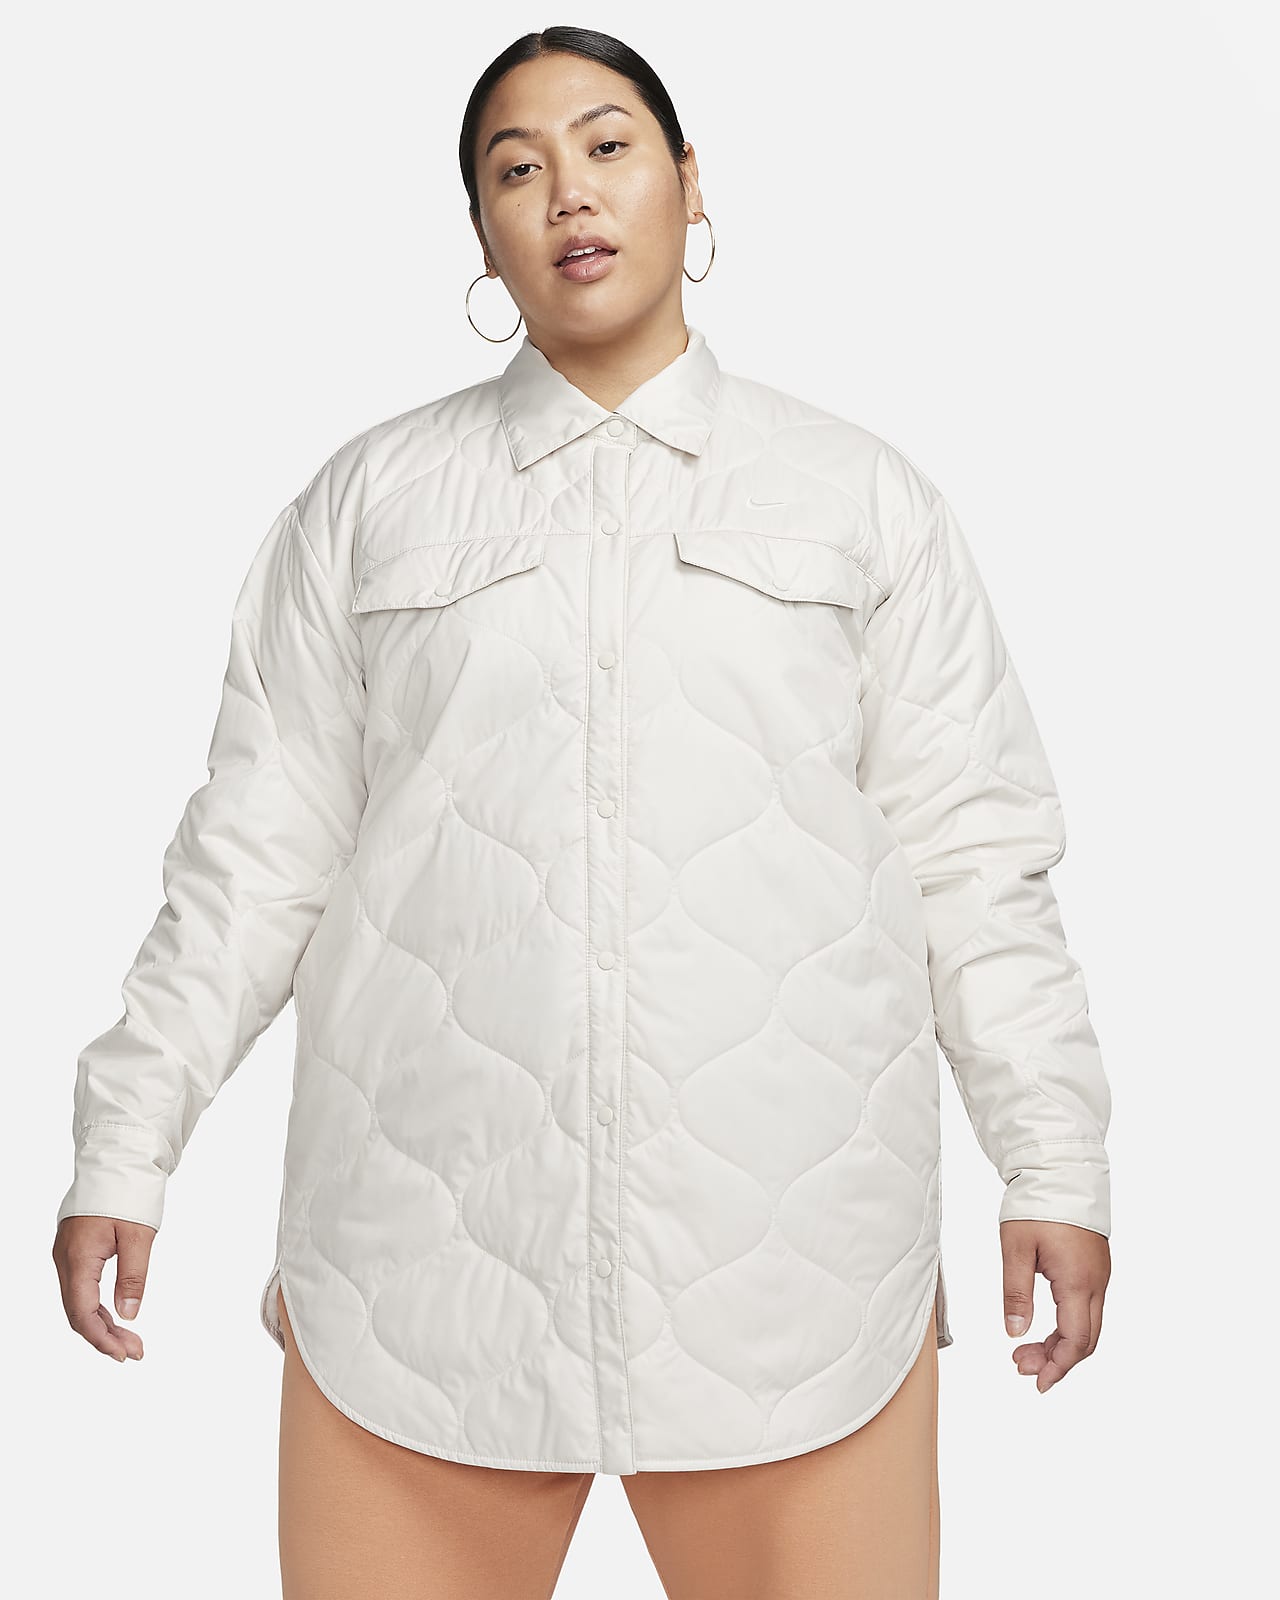 https://static.nike.com/a/images/t_PDP_1280_v1/f_auto,q_auto:eco/b48956ab-3213-4951-b6c5-f422bcdde360/sportswear-essential-quilted-trench-l5tf4R.png